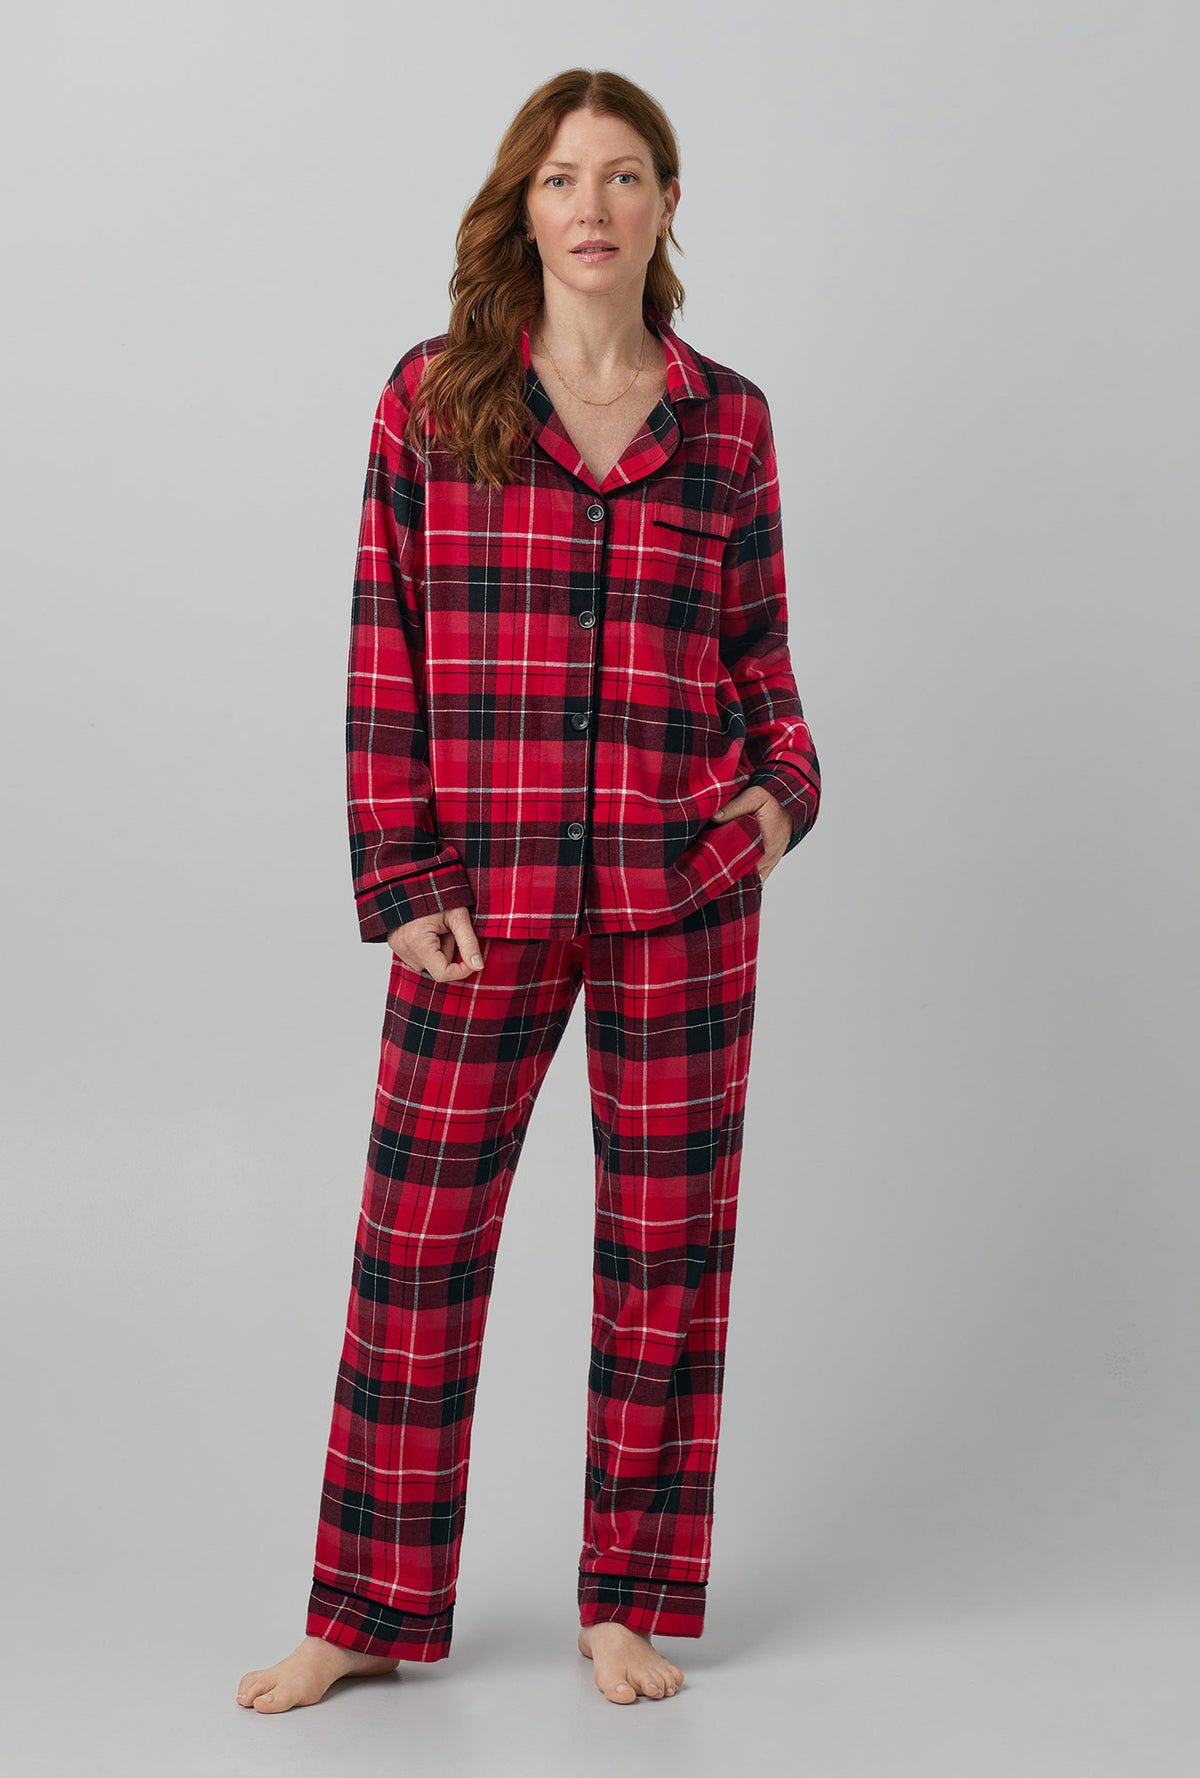 A lady wearing red long sleeve clasic woven cotton flannel pj set with nicholas plaid print.